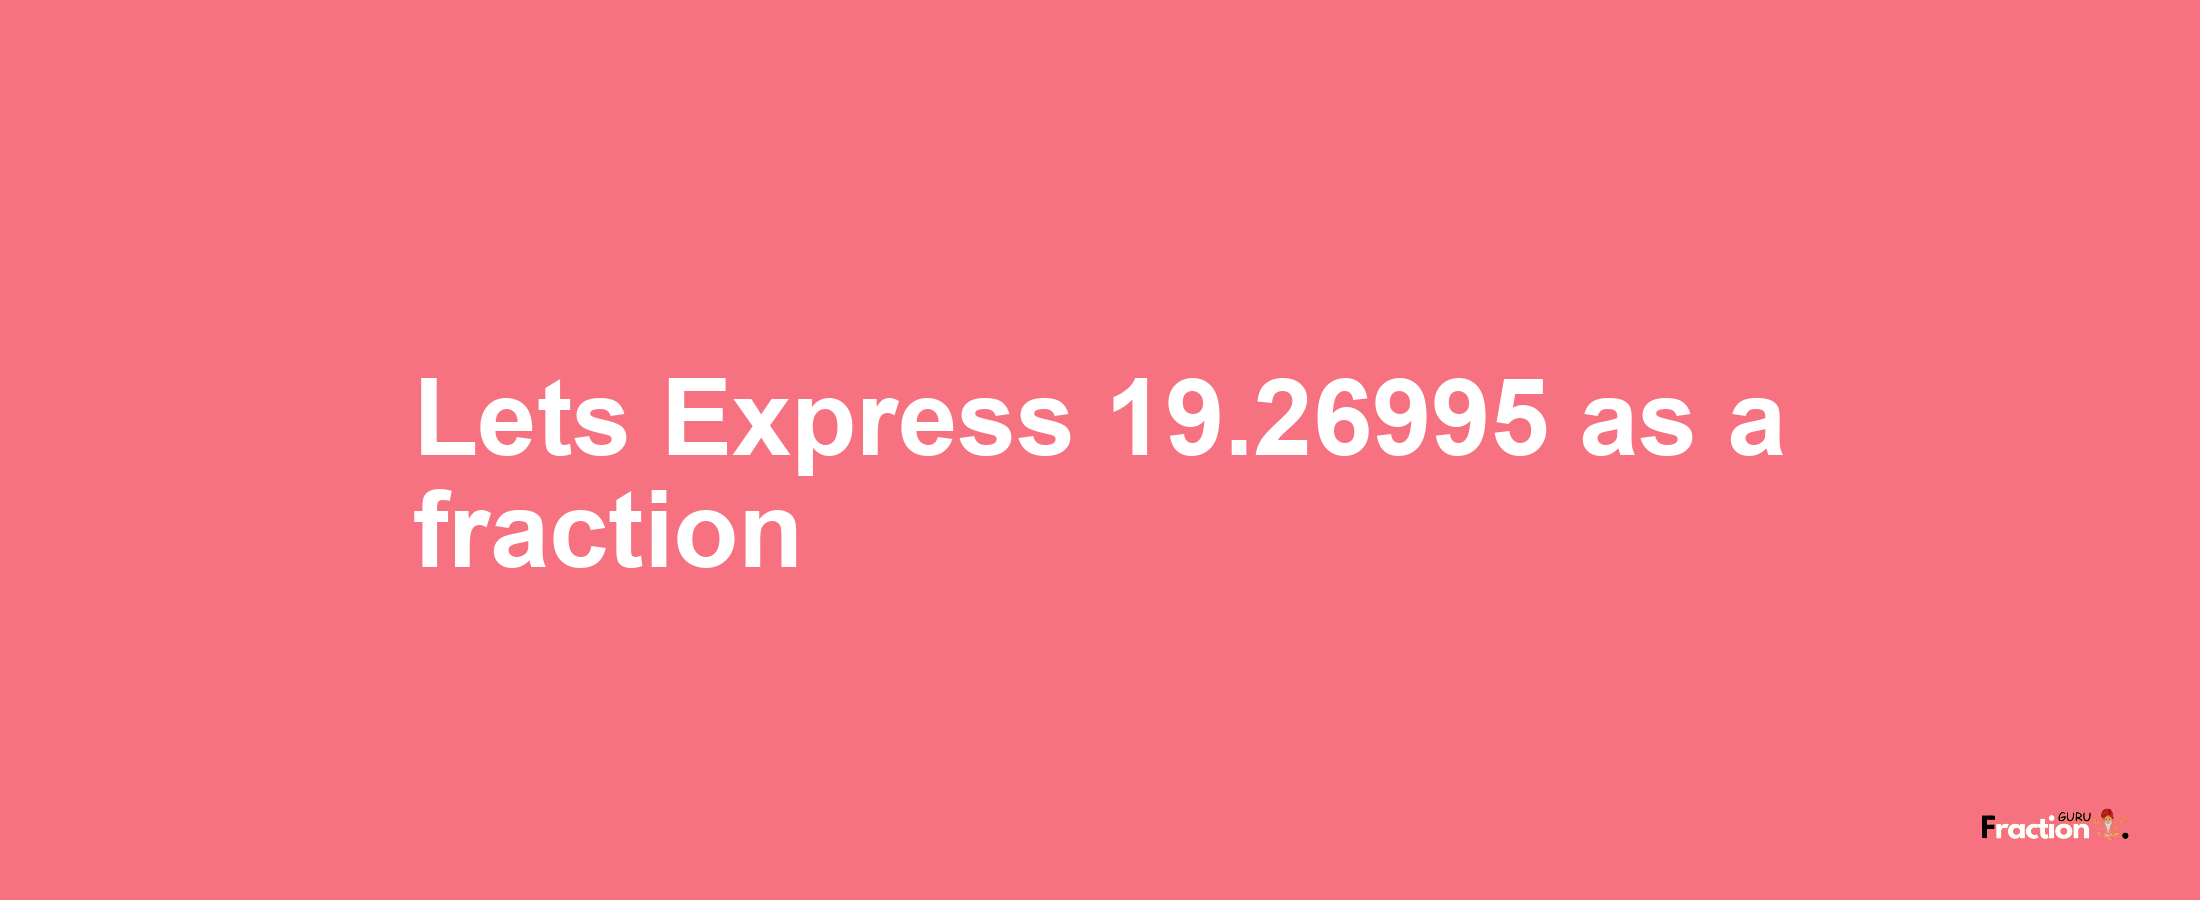 Lets Express 19.26995 as afraction